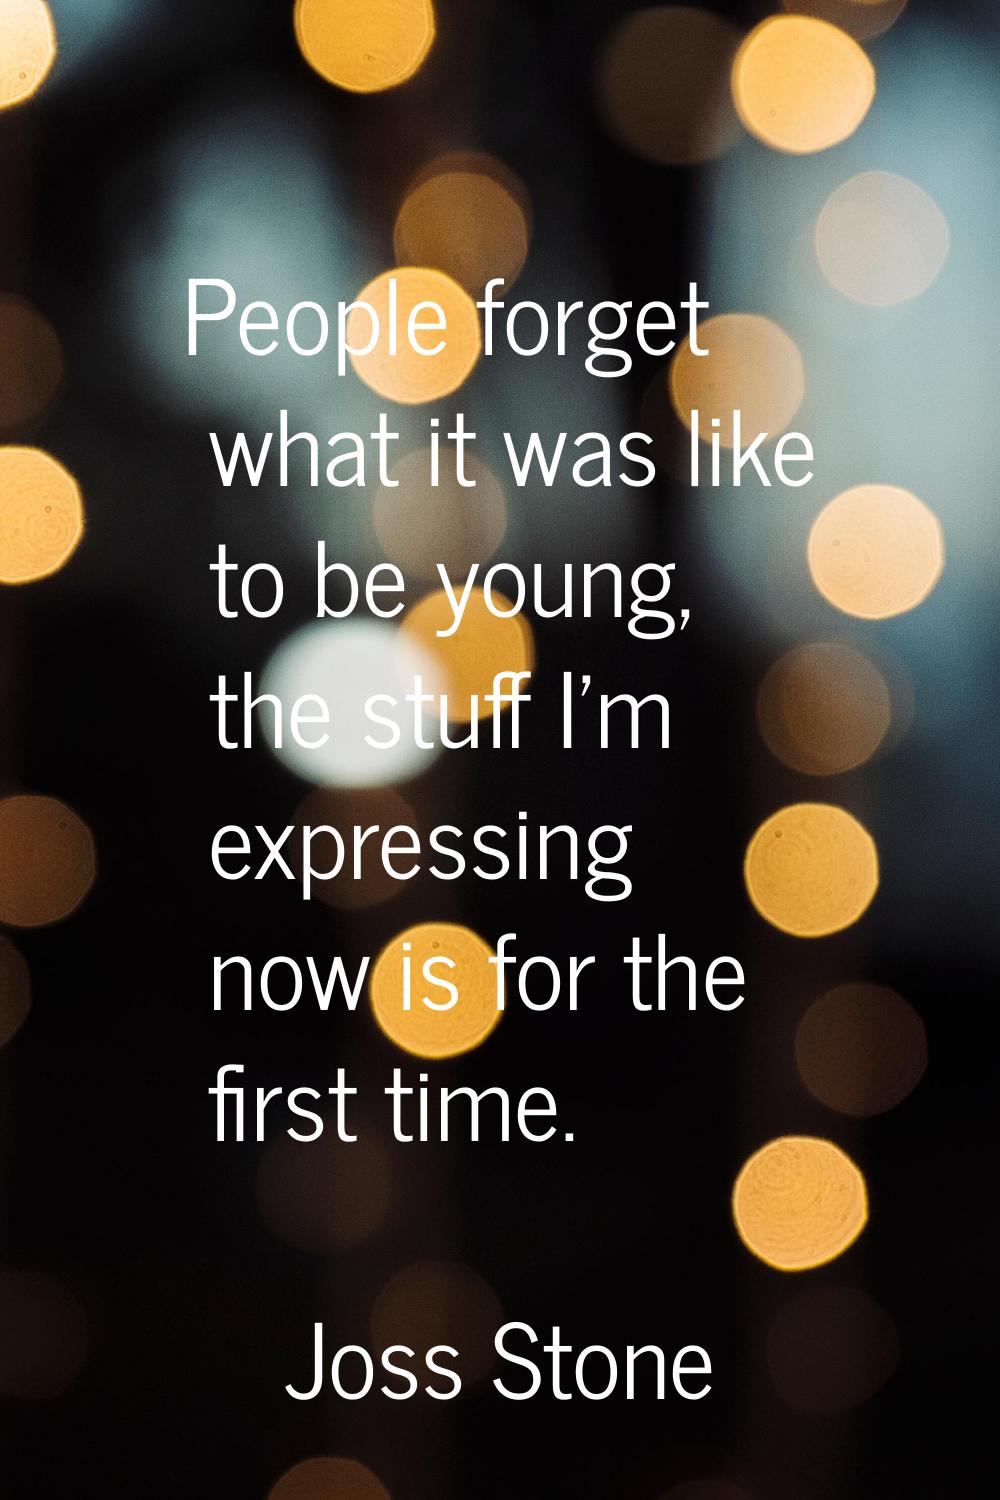 People forget what it was like to be young, the stuff I'm expressing now is for the first time.